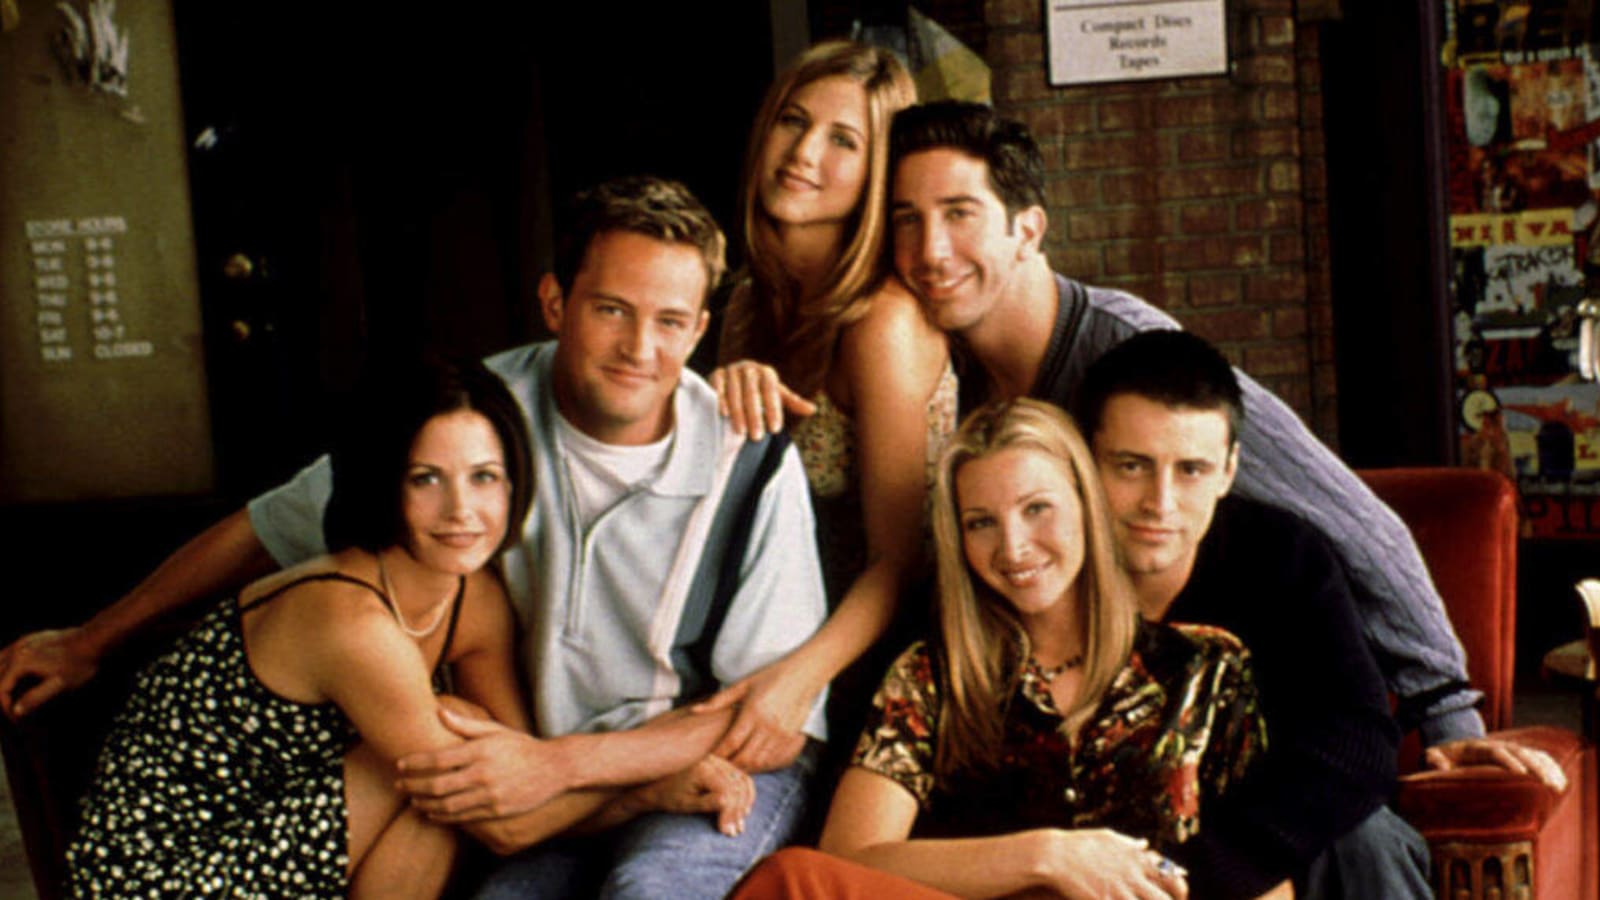 'Friends' cast 'devastated' by Matthew Perry's death: 'We are a family'